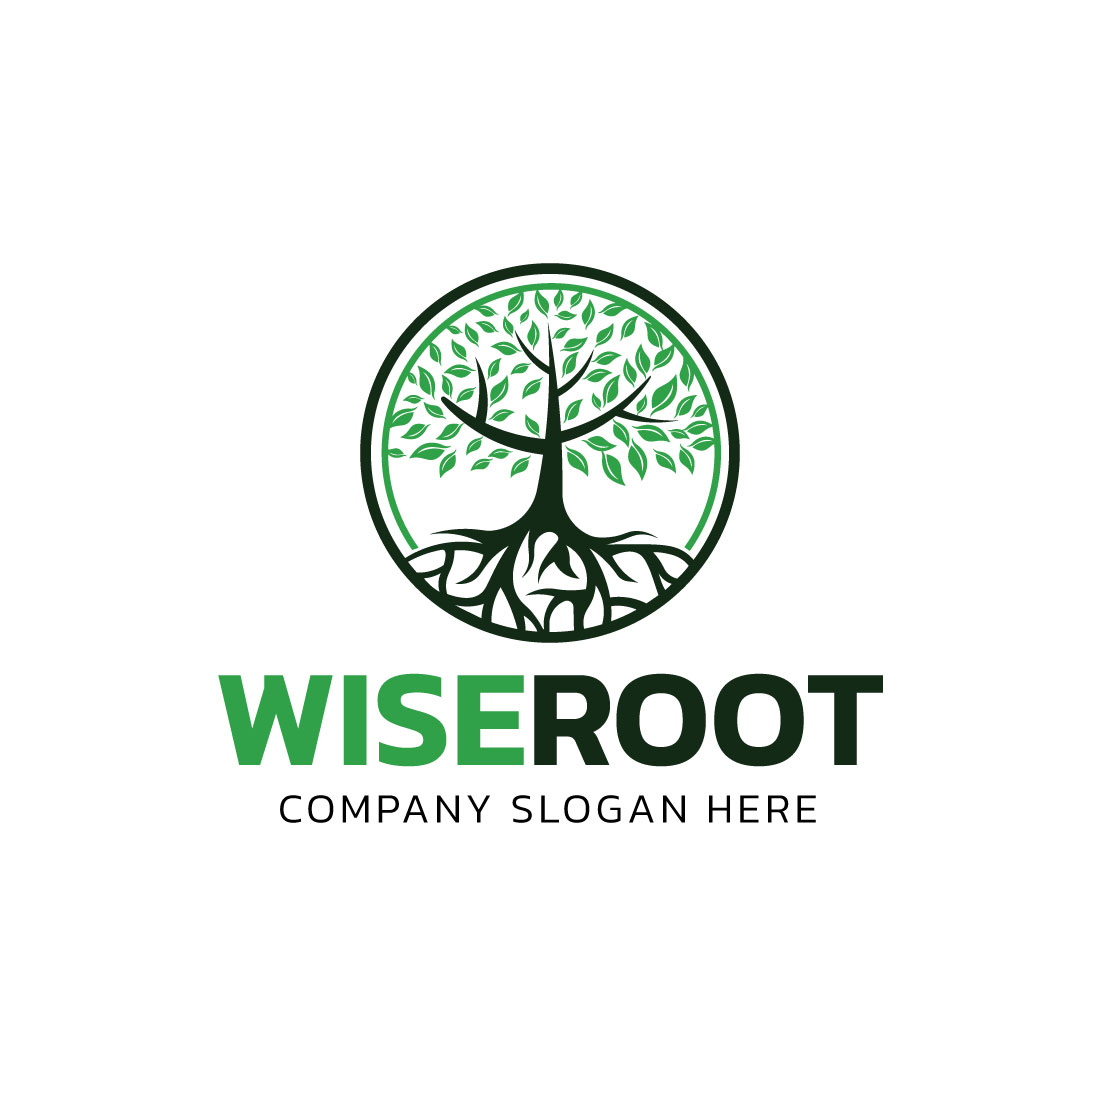 Wise Root Logo design cover image.